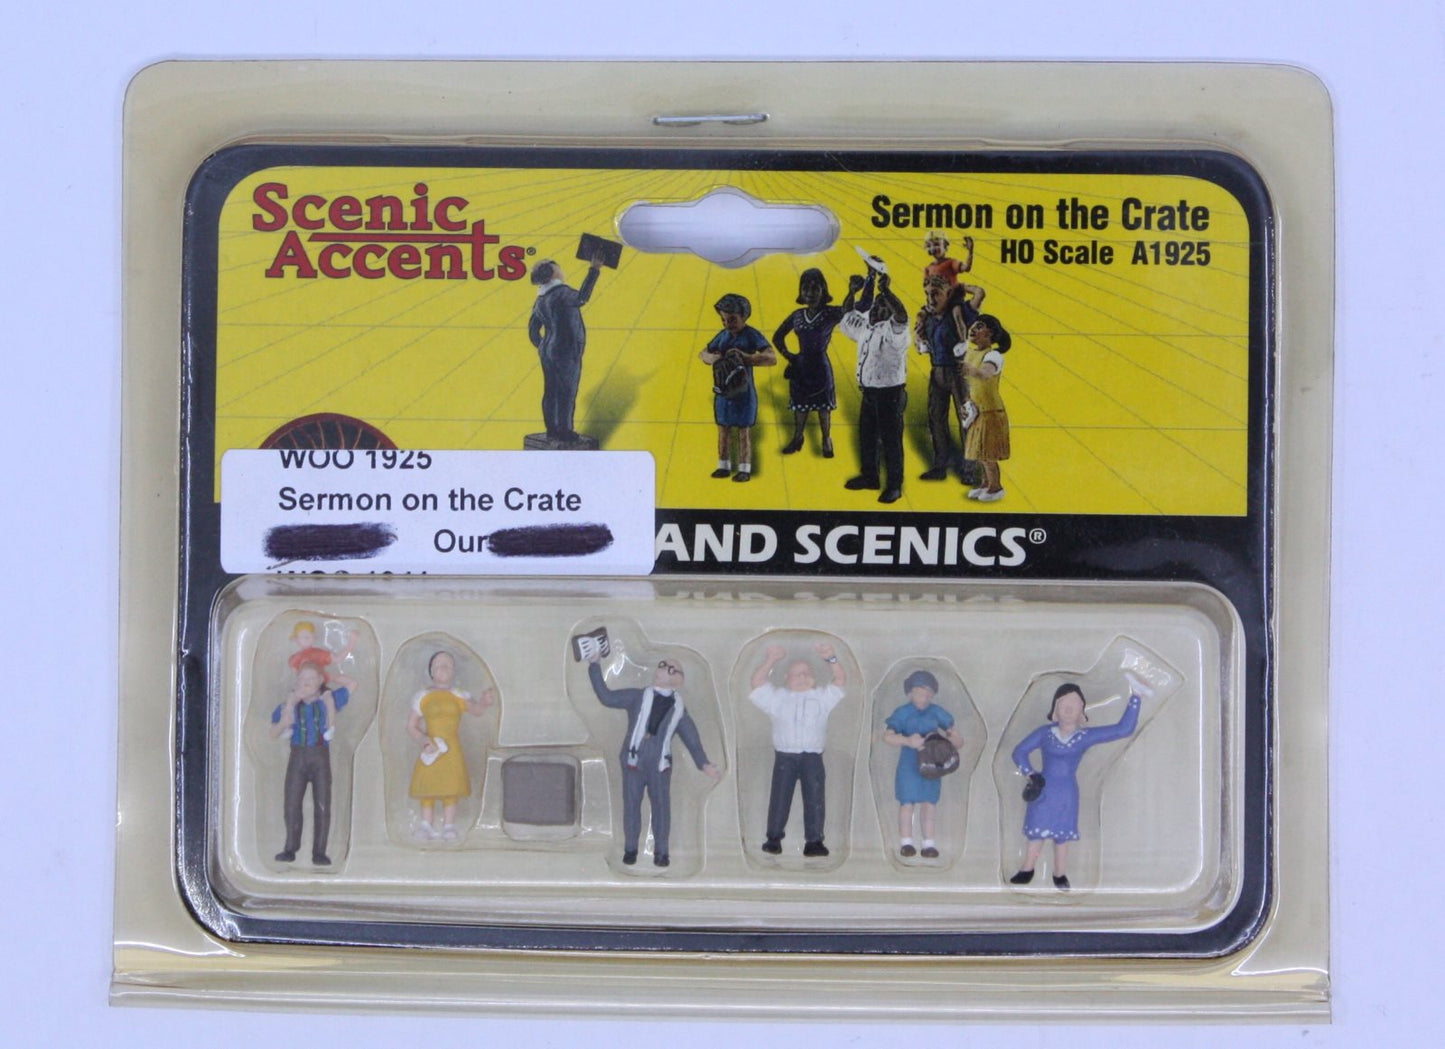 Woodland Scenics A1925 HO Scenic Accents Sermon on the Crate Figures (Set of 7)